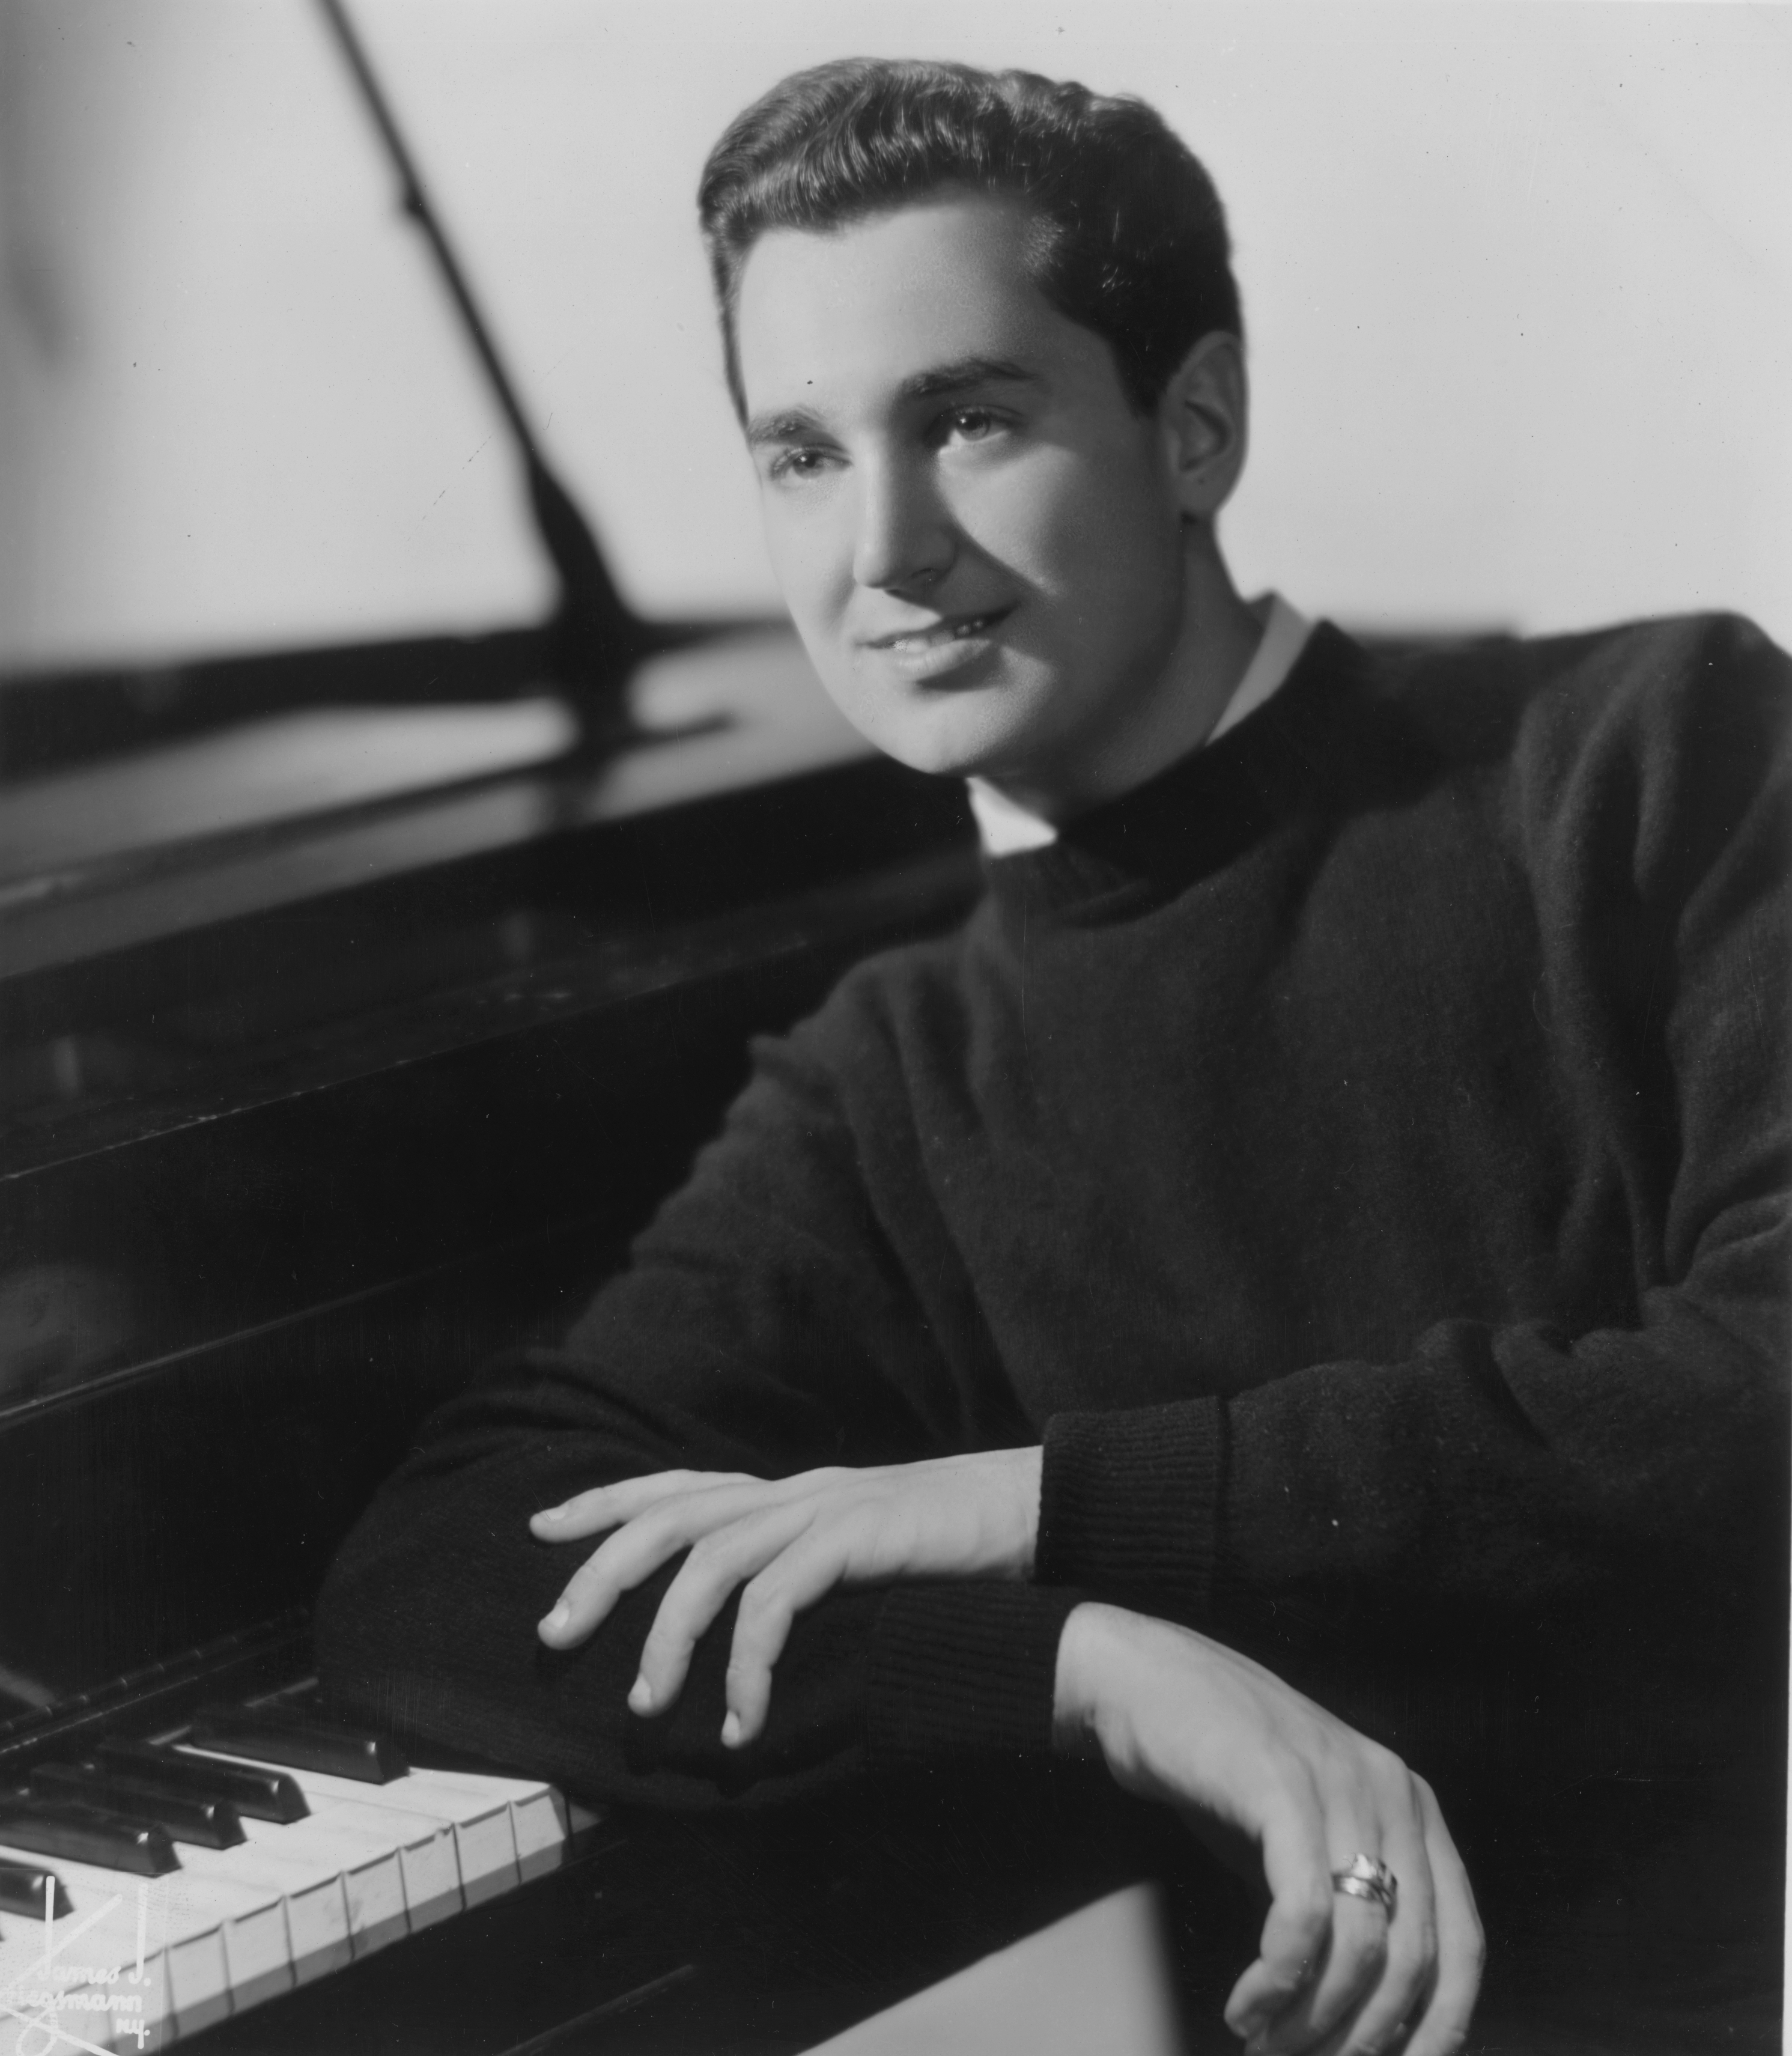 Neil Sedaka in a black and white portrait in 1955 | Source: Getty Images